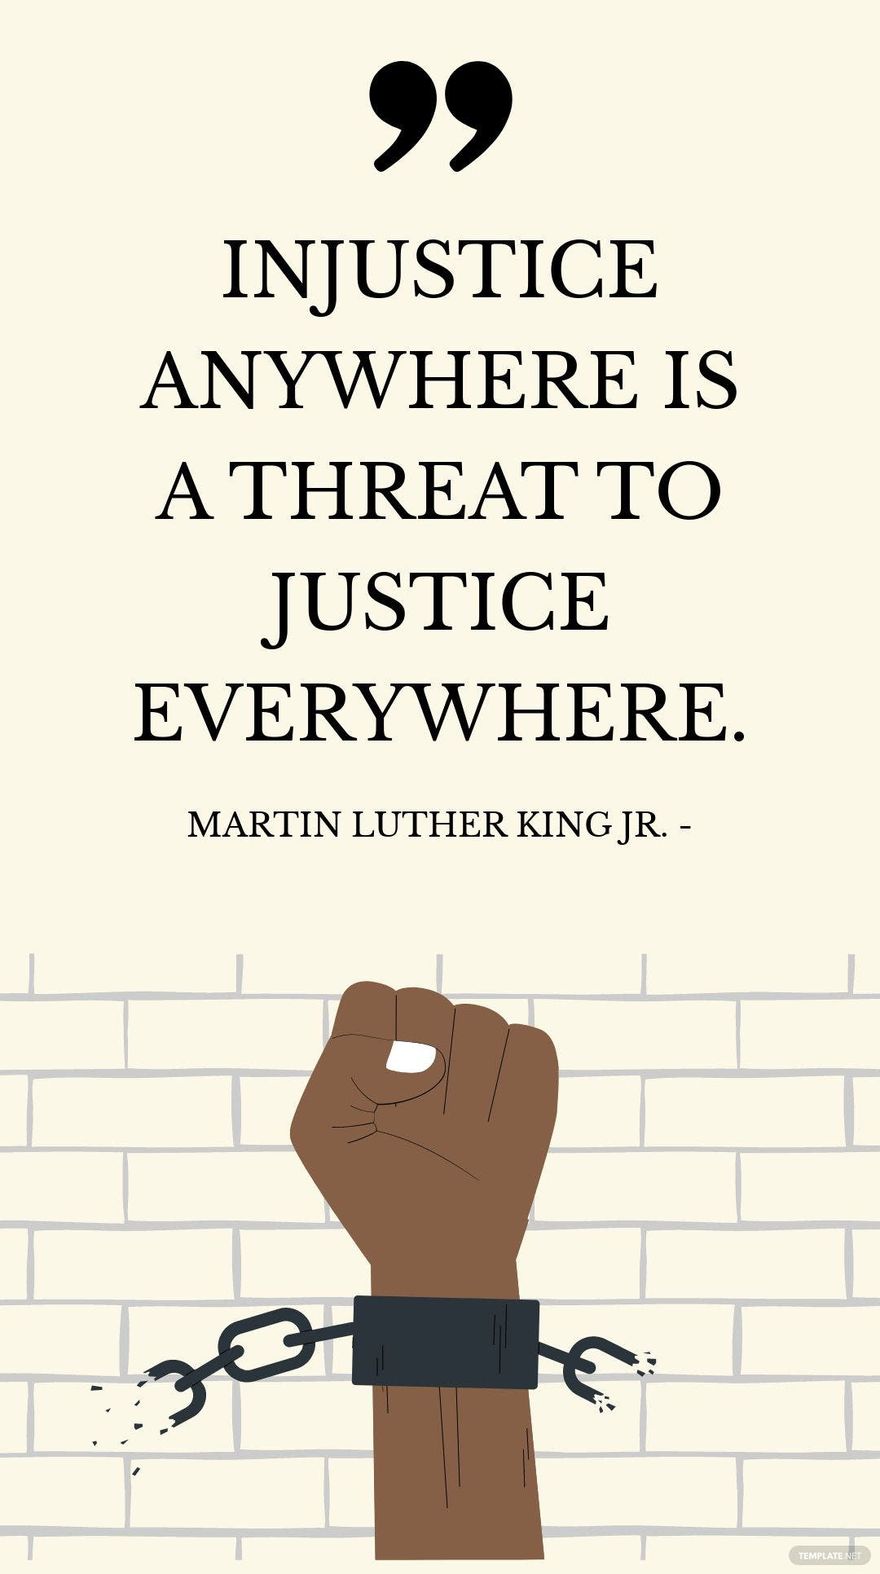 Martin Luther King Jr. - Injustice anywhere is a threat to justice everywhere.